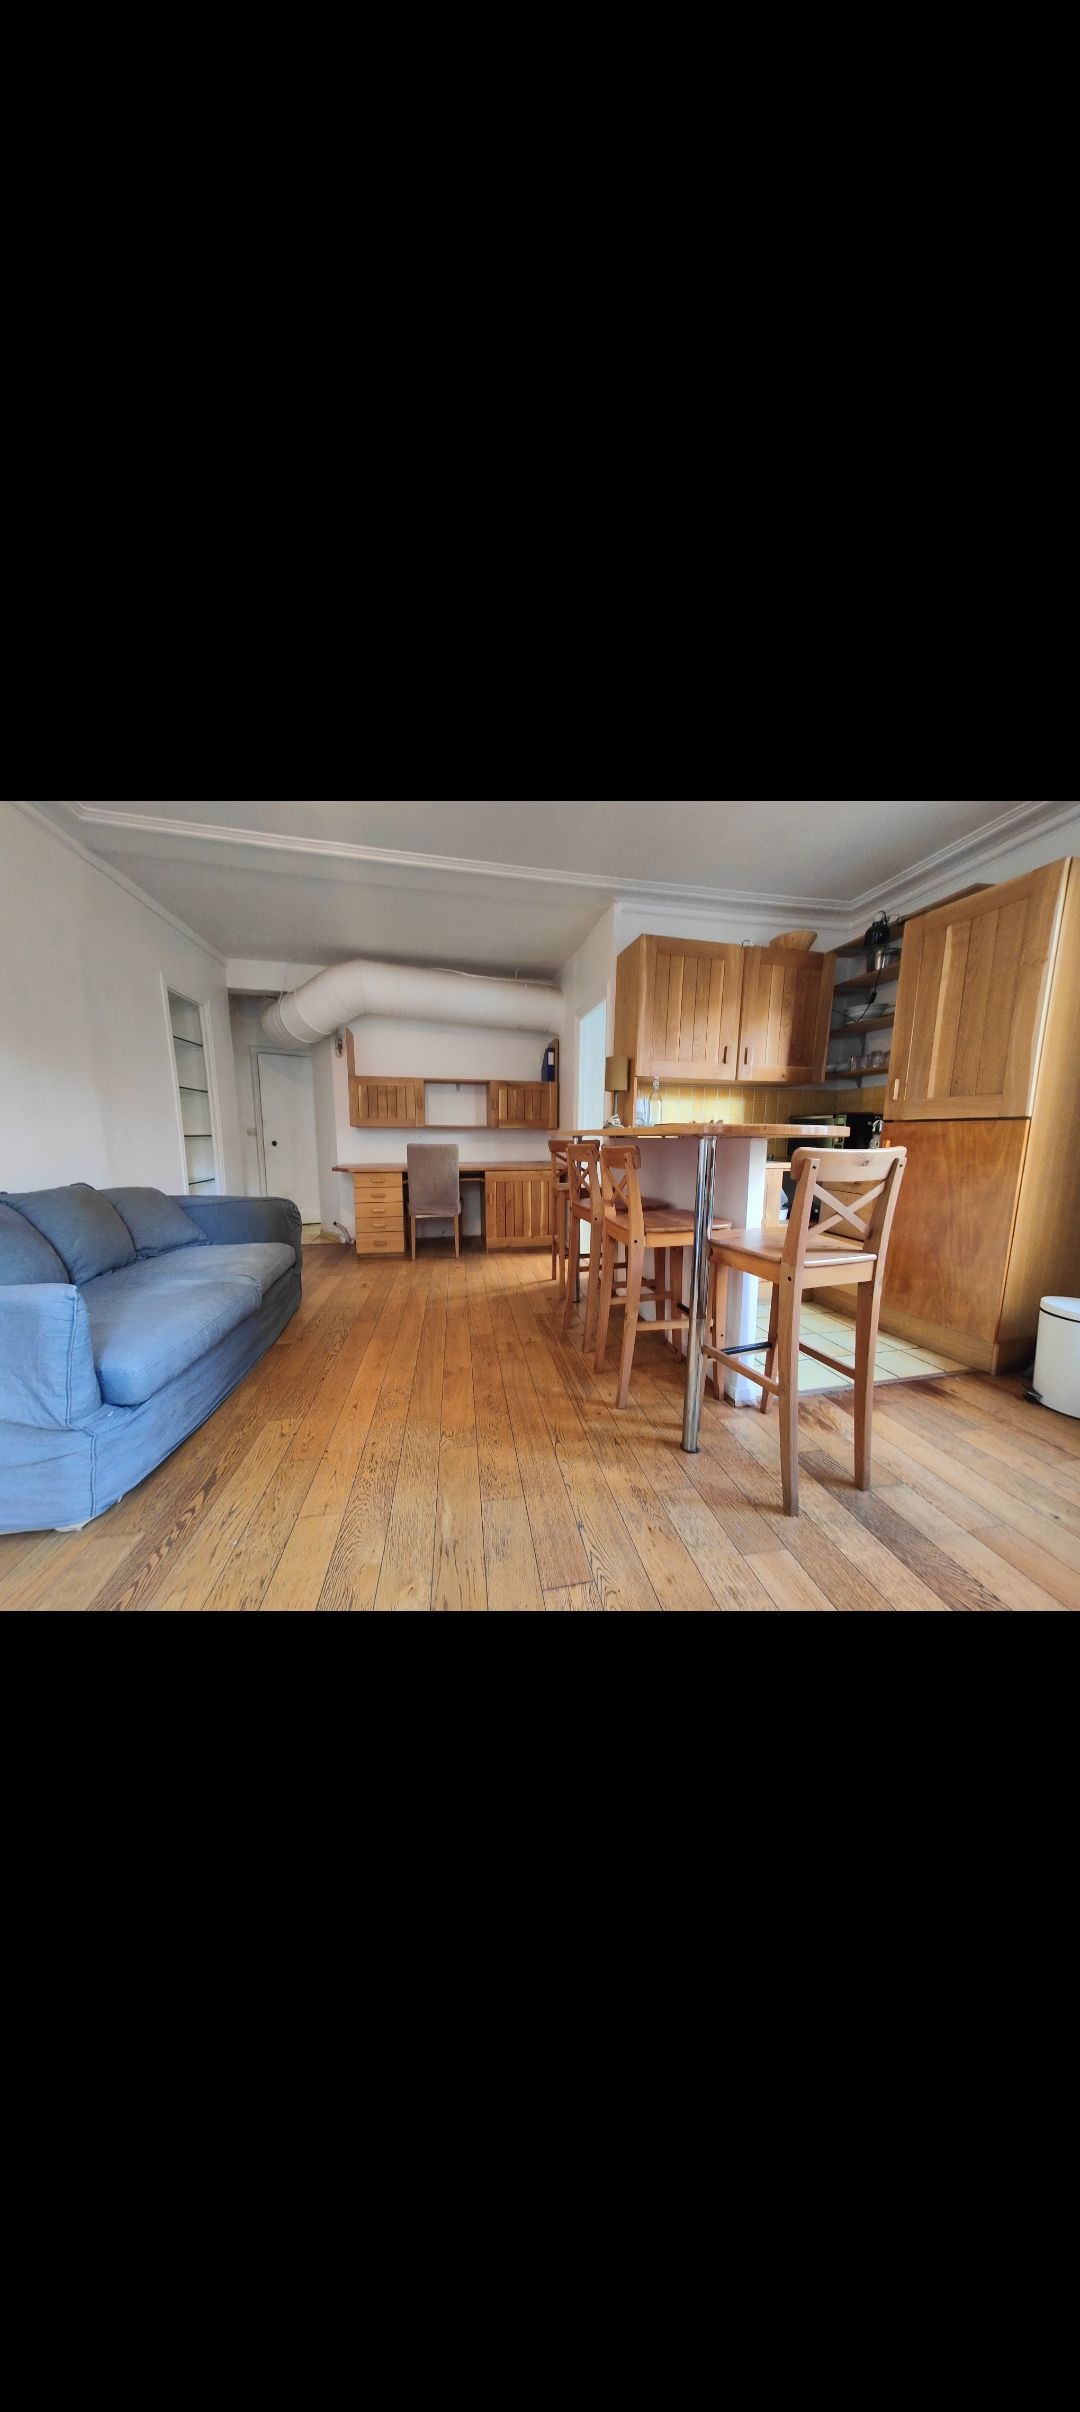 Great flat in excellent location